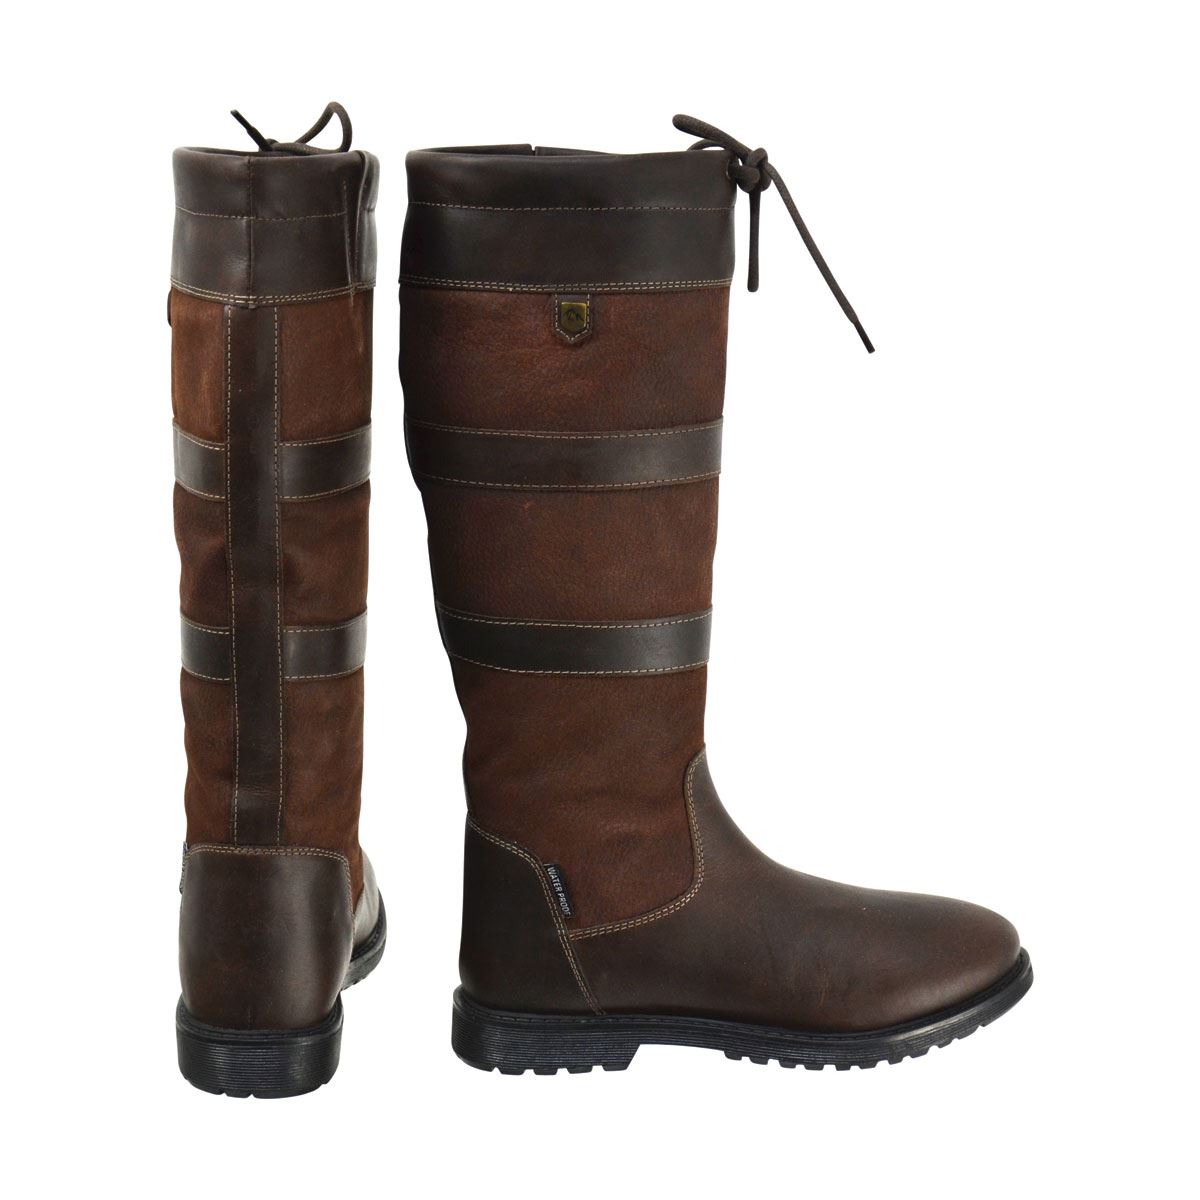 HyLAND Bakewell Long Country Boot - Just Horse Riders